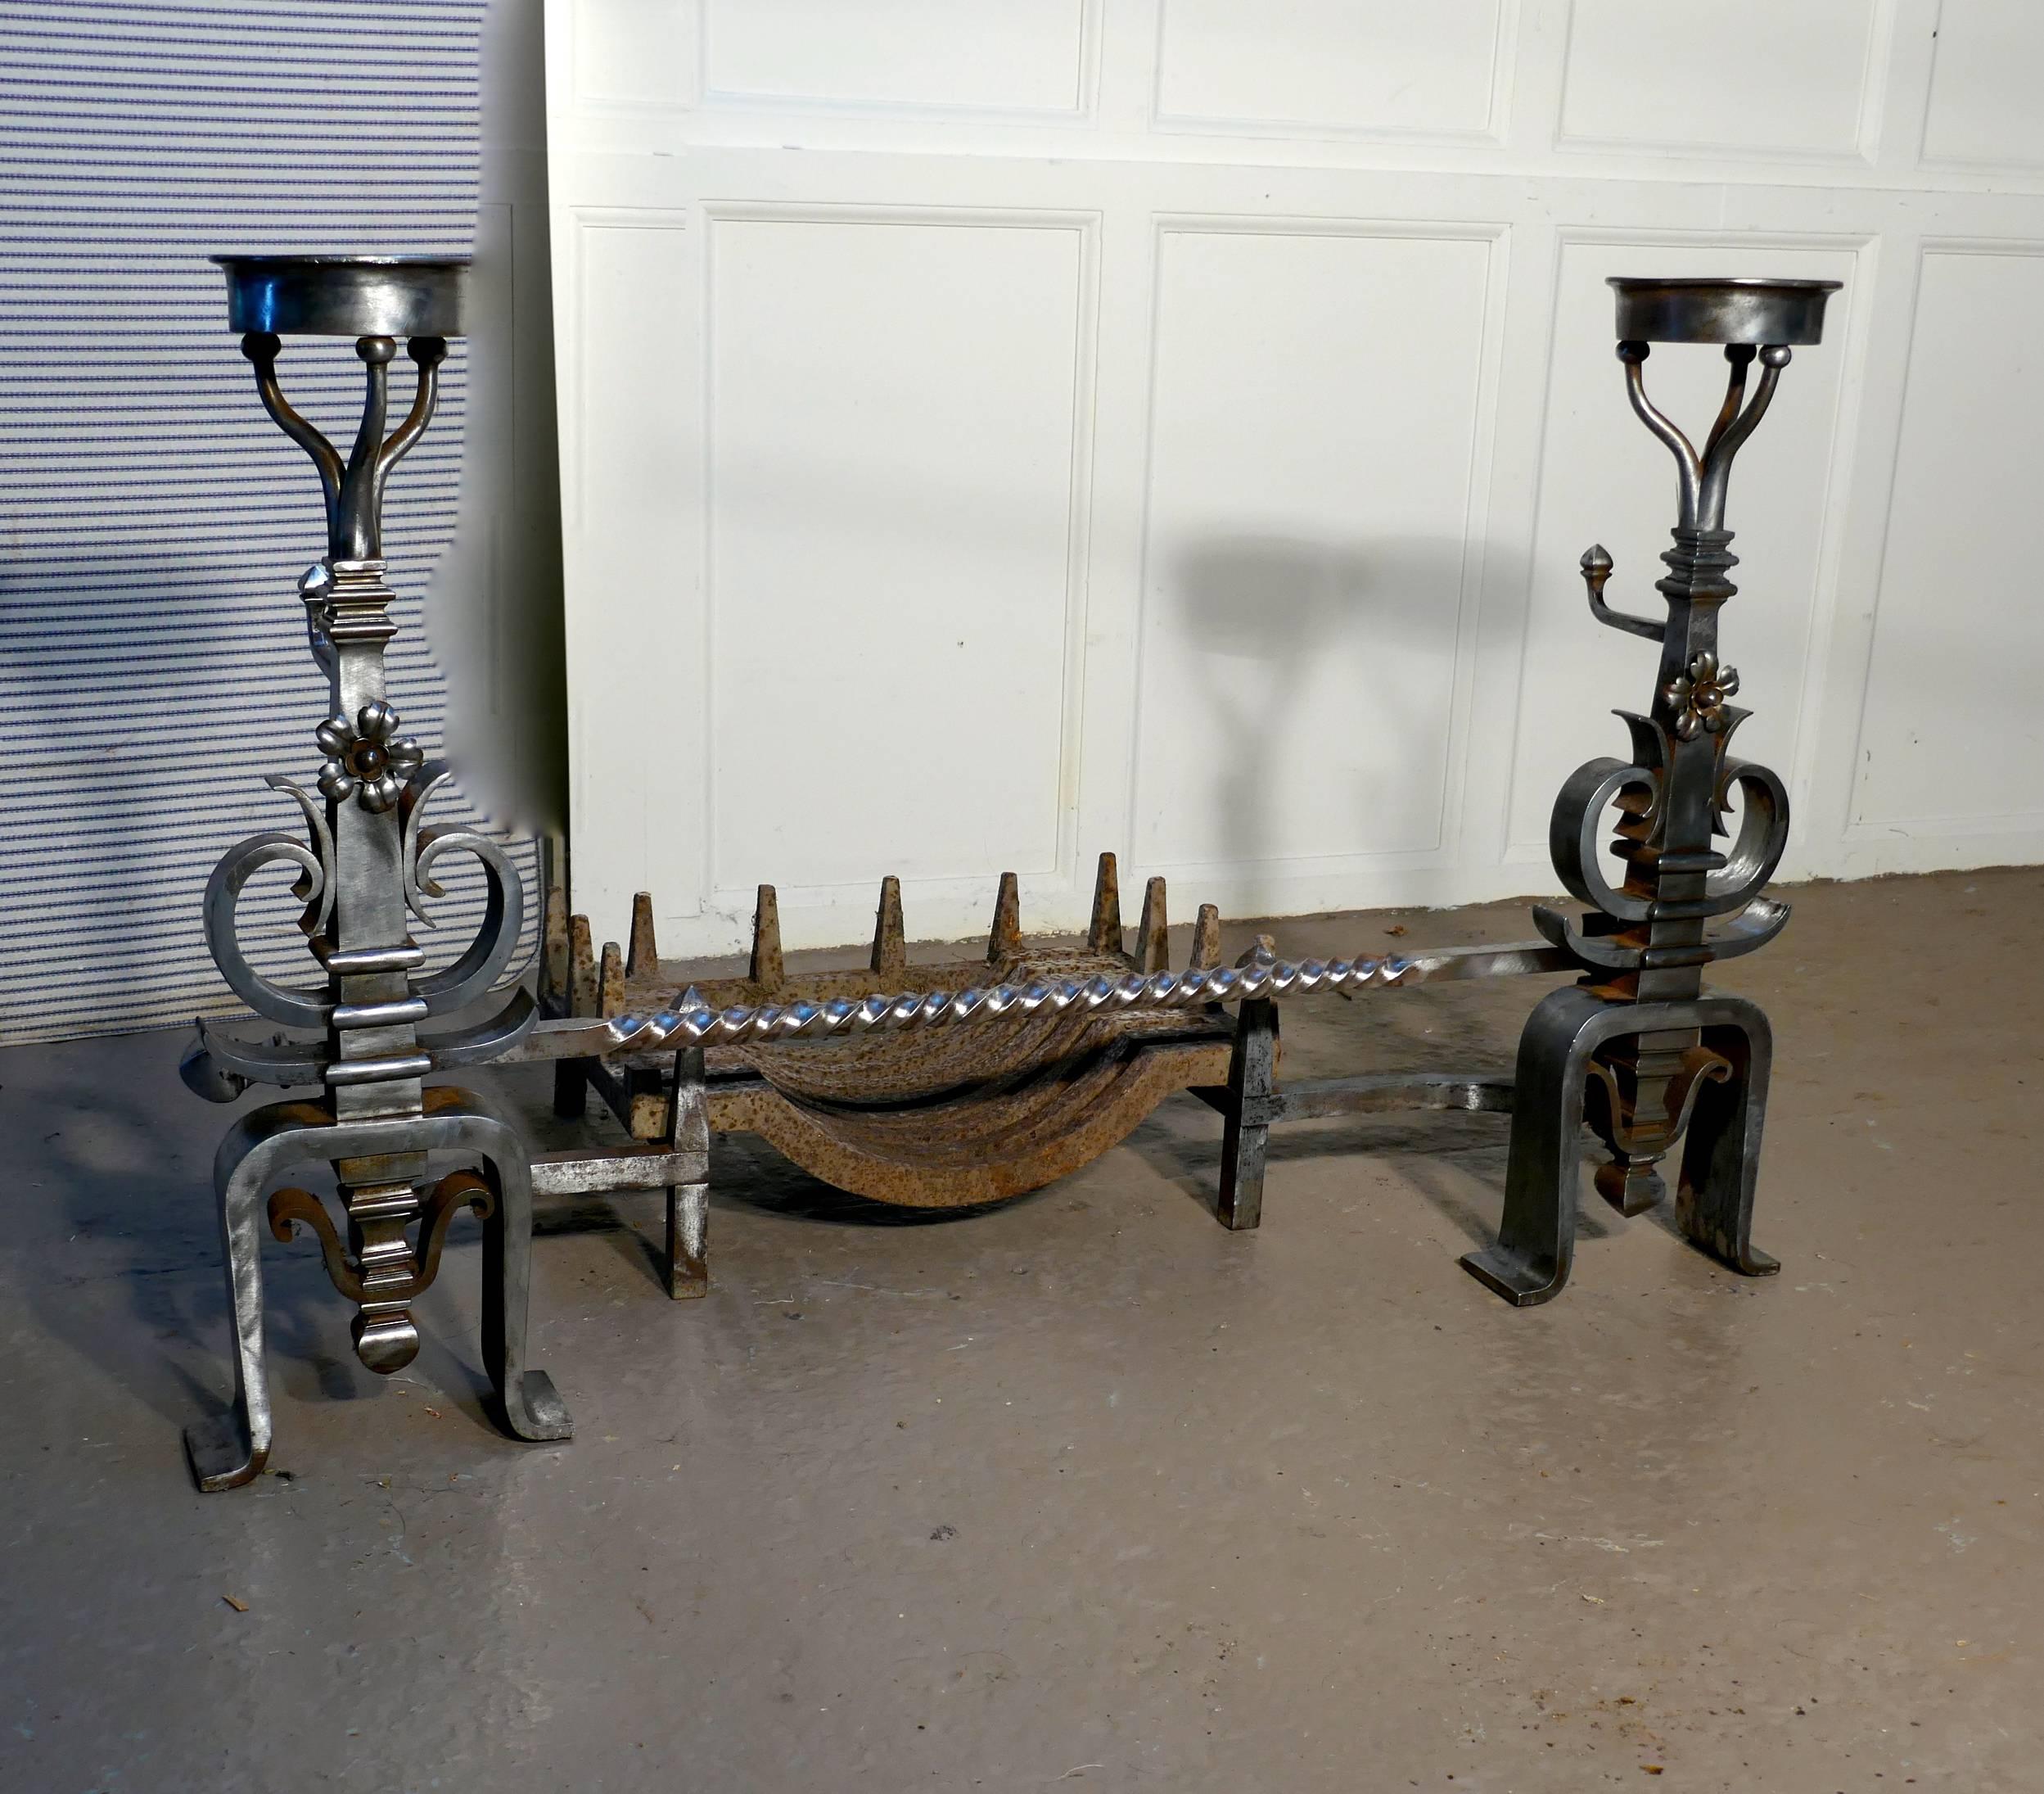 Large pair of 19th century French iron andirons or fire dogs

This is a very large pair of bowl andirons, they are Blacksmith made with bowls to the top and spit rod, needless to say these are very heavy pieces.
The andirons are decorative and